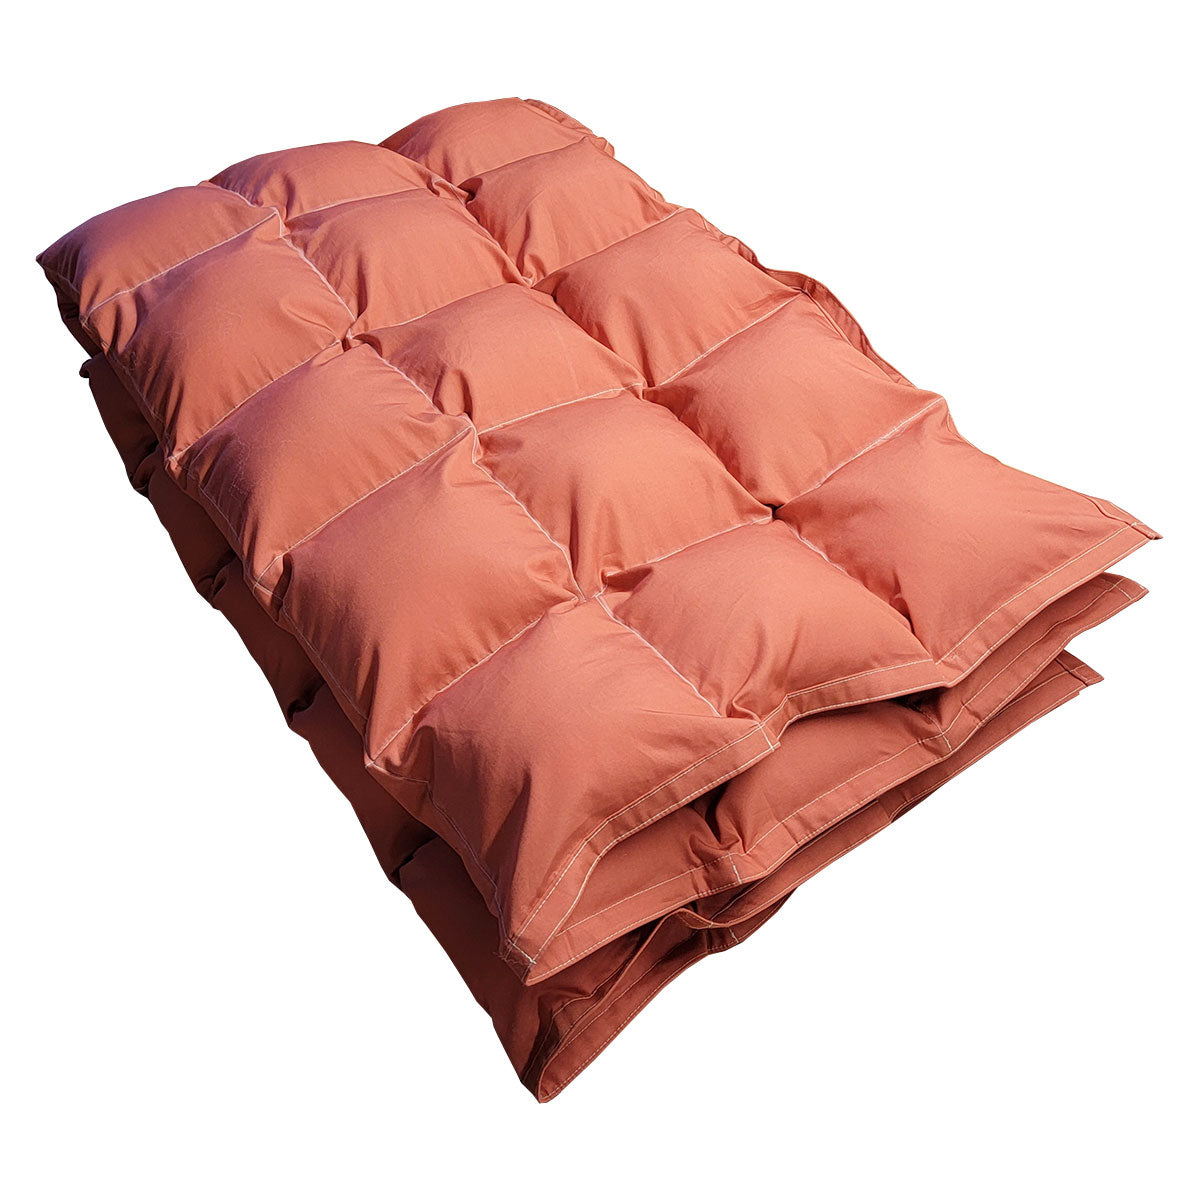 Clearance Weighted Blanket - Medium 9 lb Terracotta (for 70 lb user)